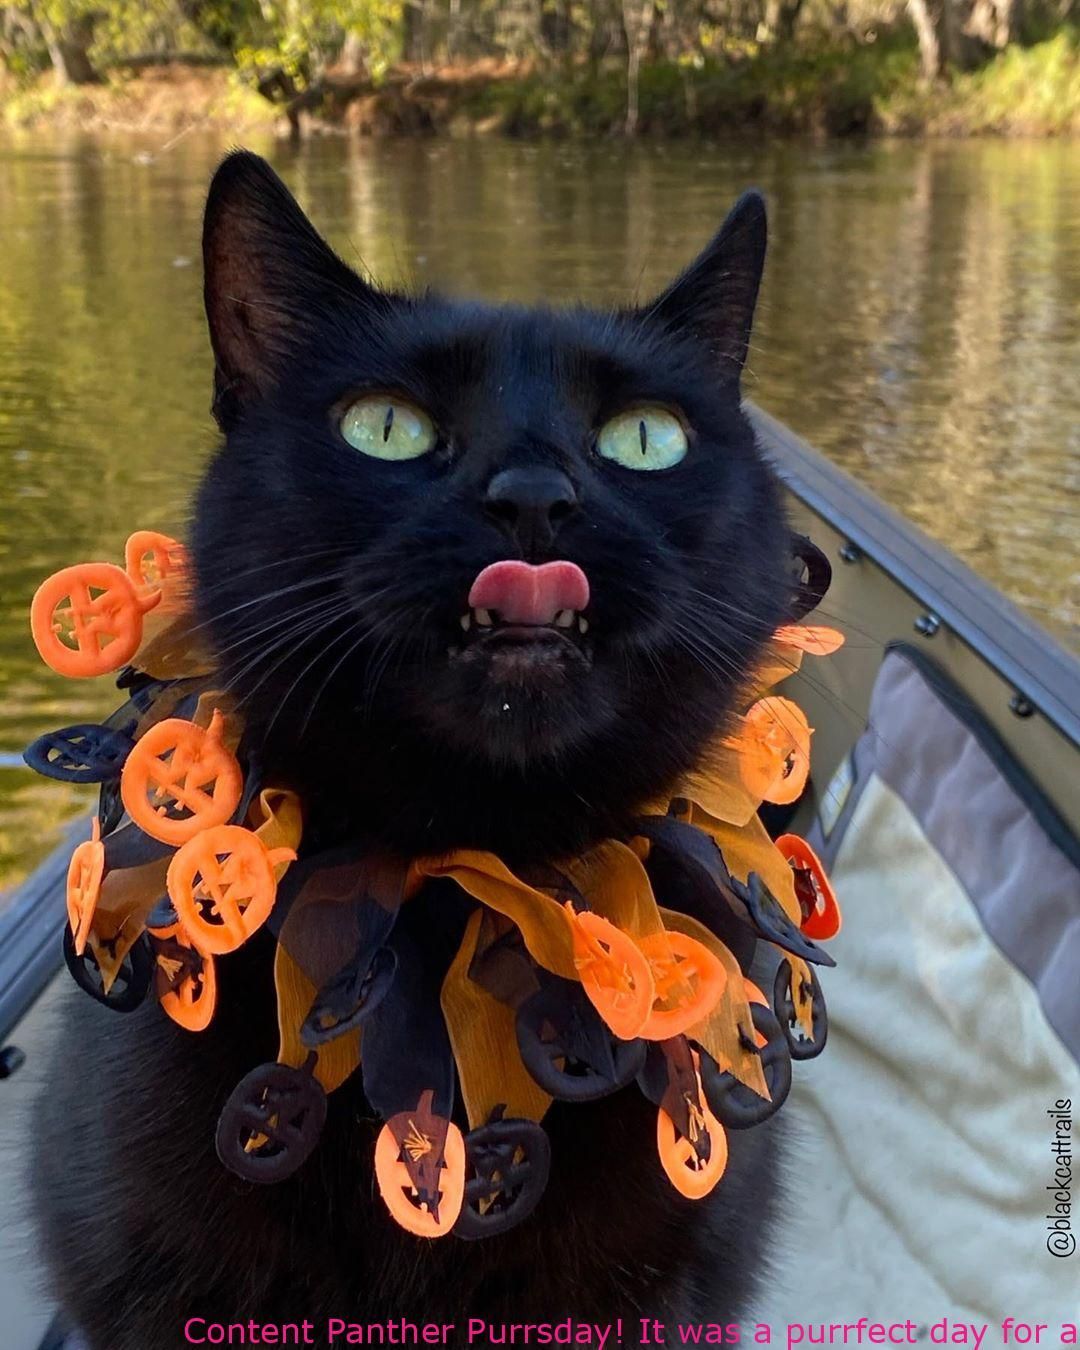 Content Panther Purrsday! It was a purrfect day for a paddle! Ledges - latest - FunnyCat -   19 diy Halloween Costumes cat ideas